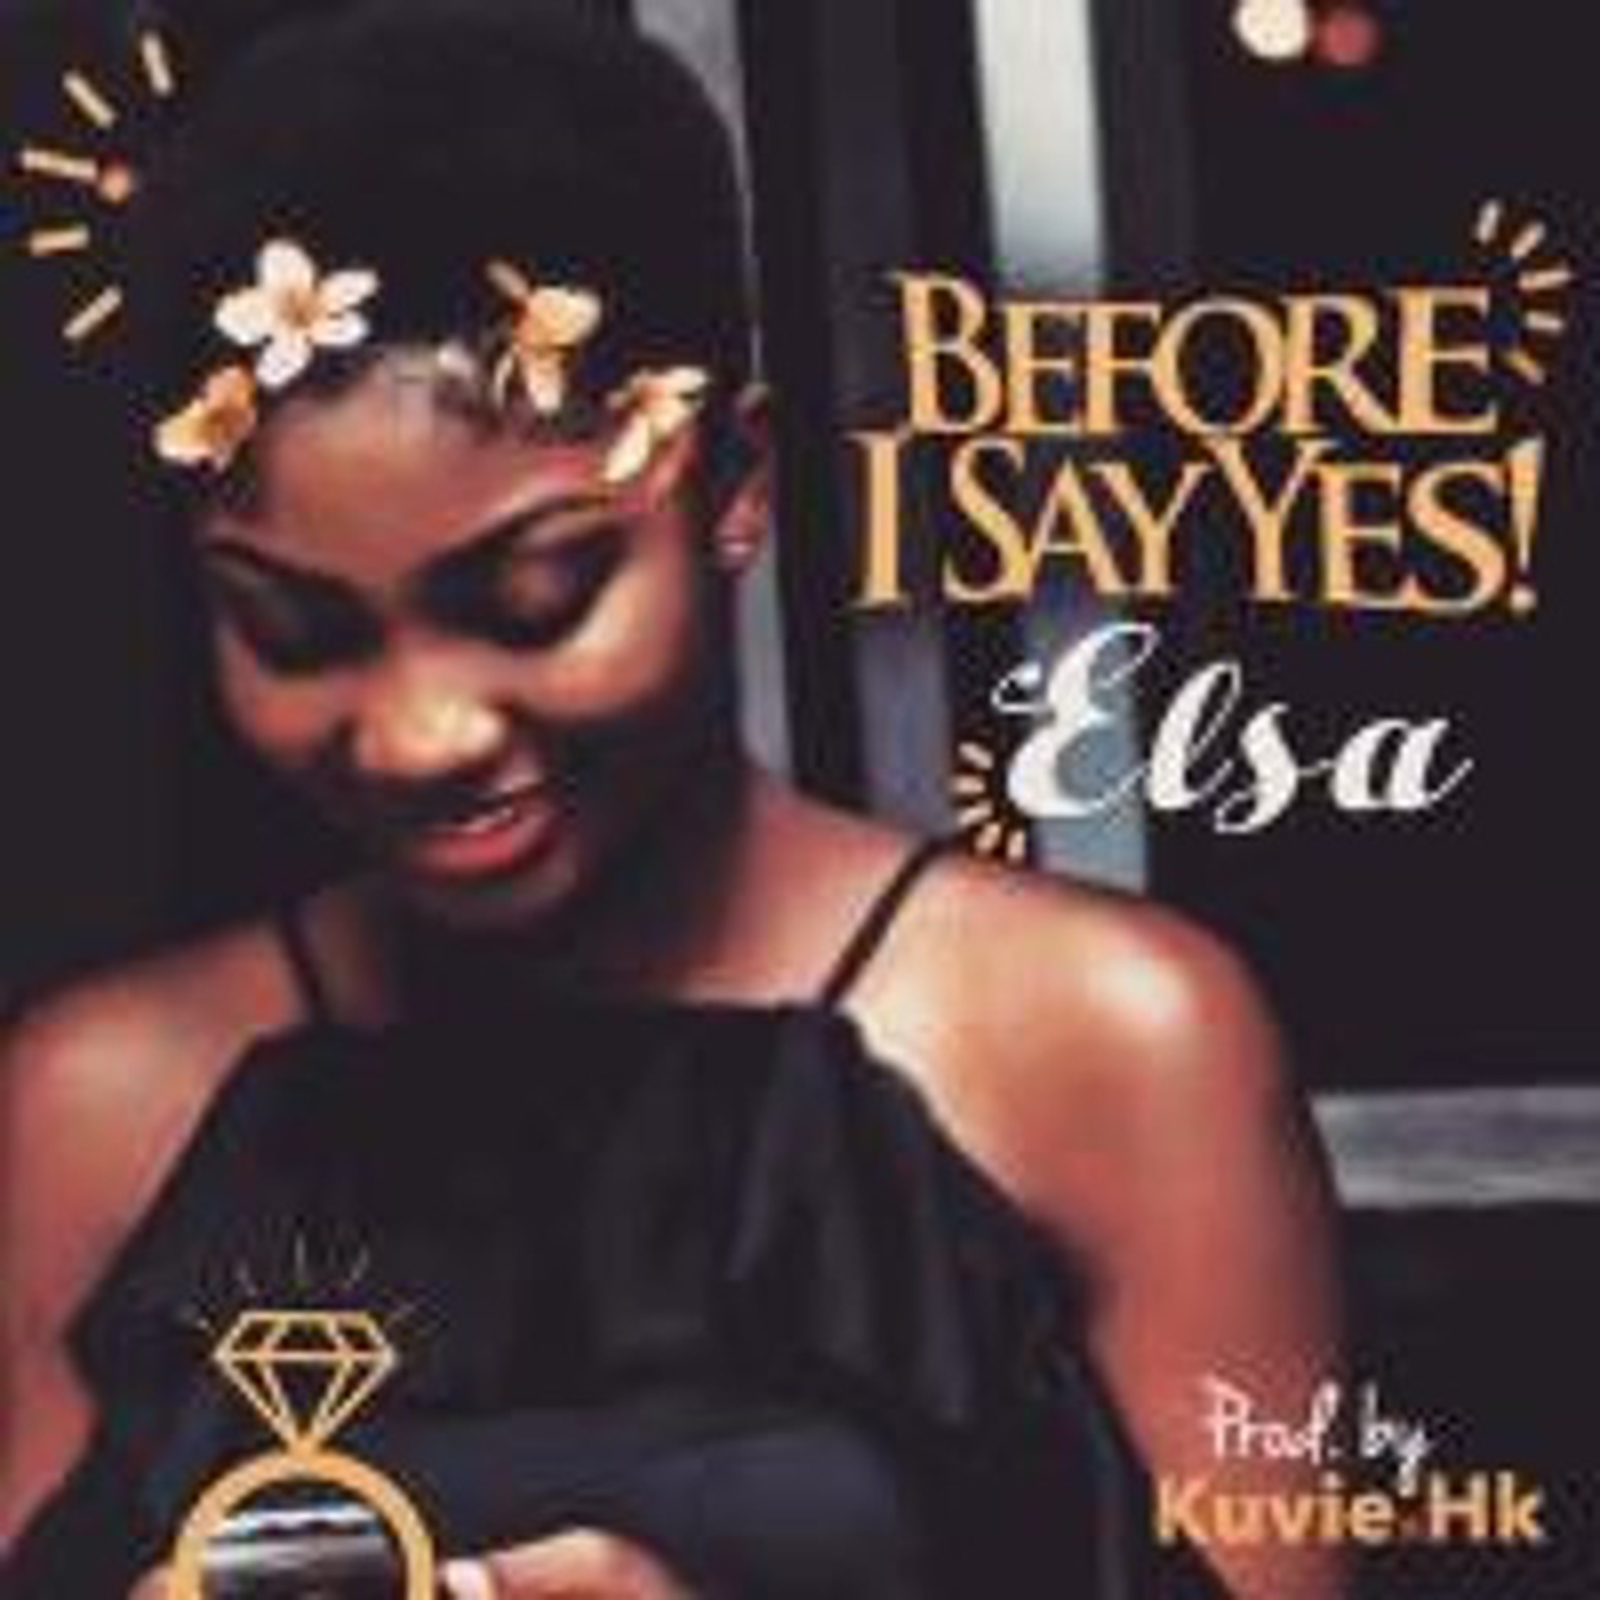 Before I Say Yes by Elsa